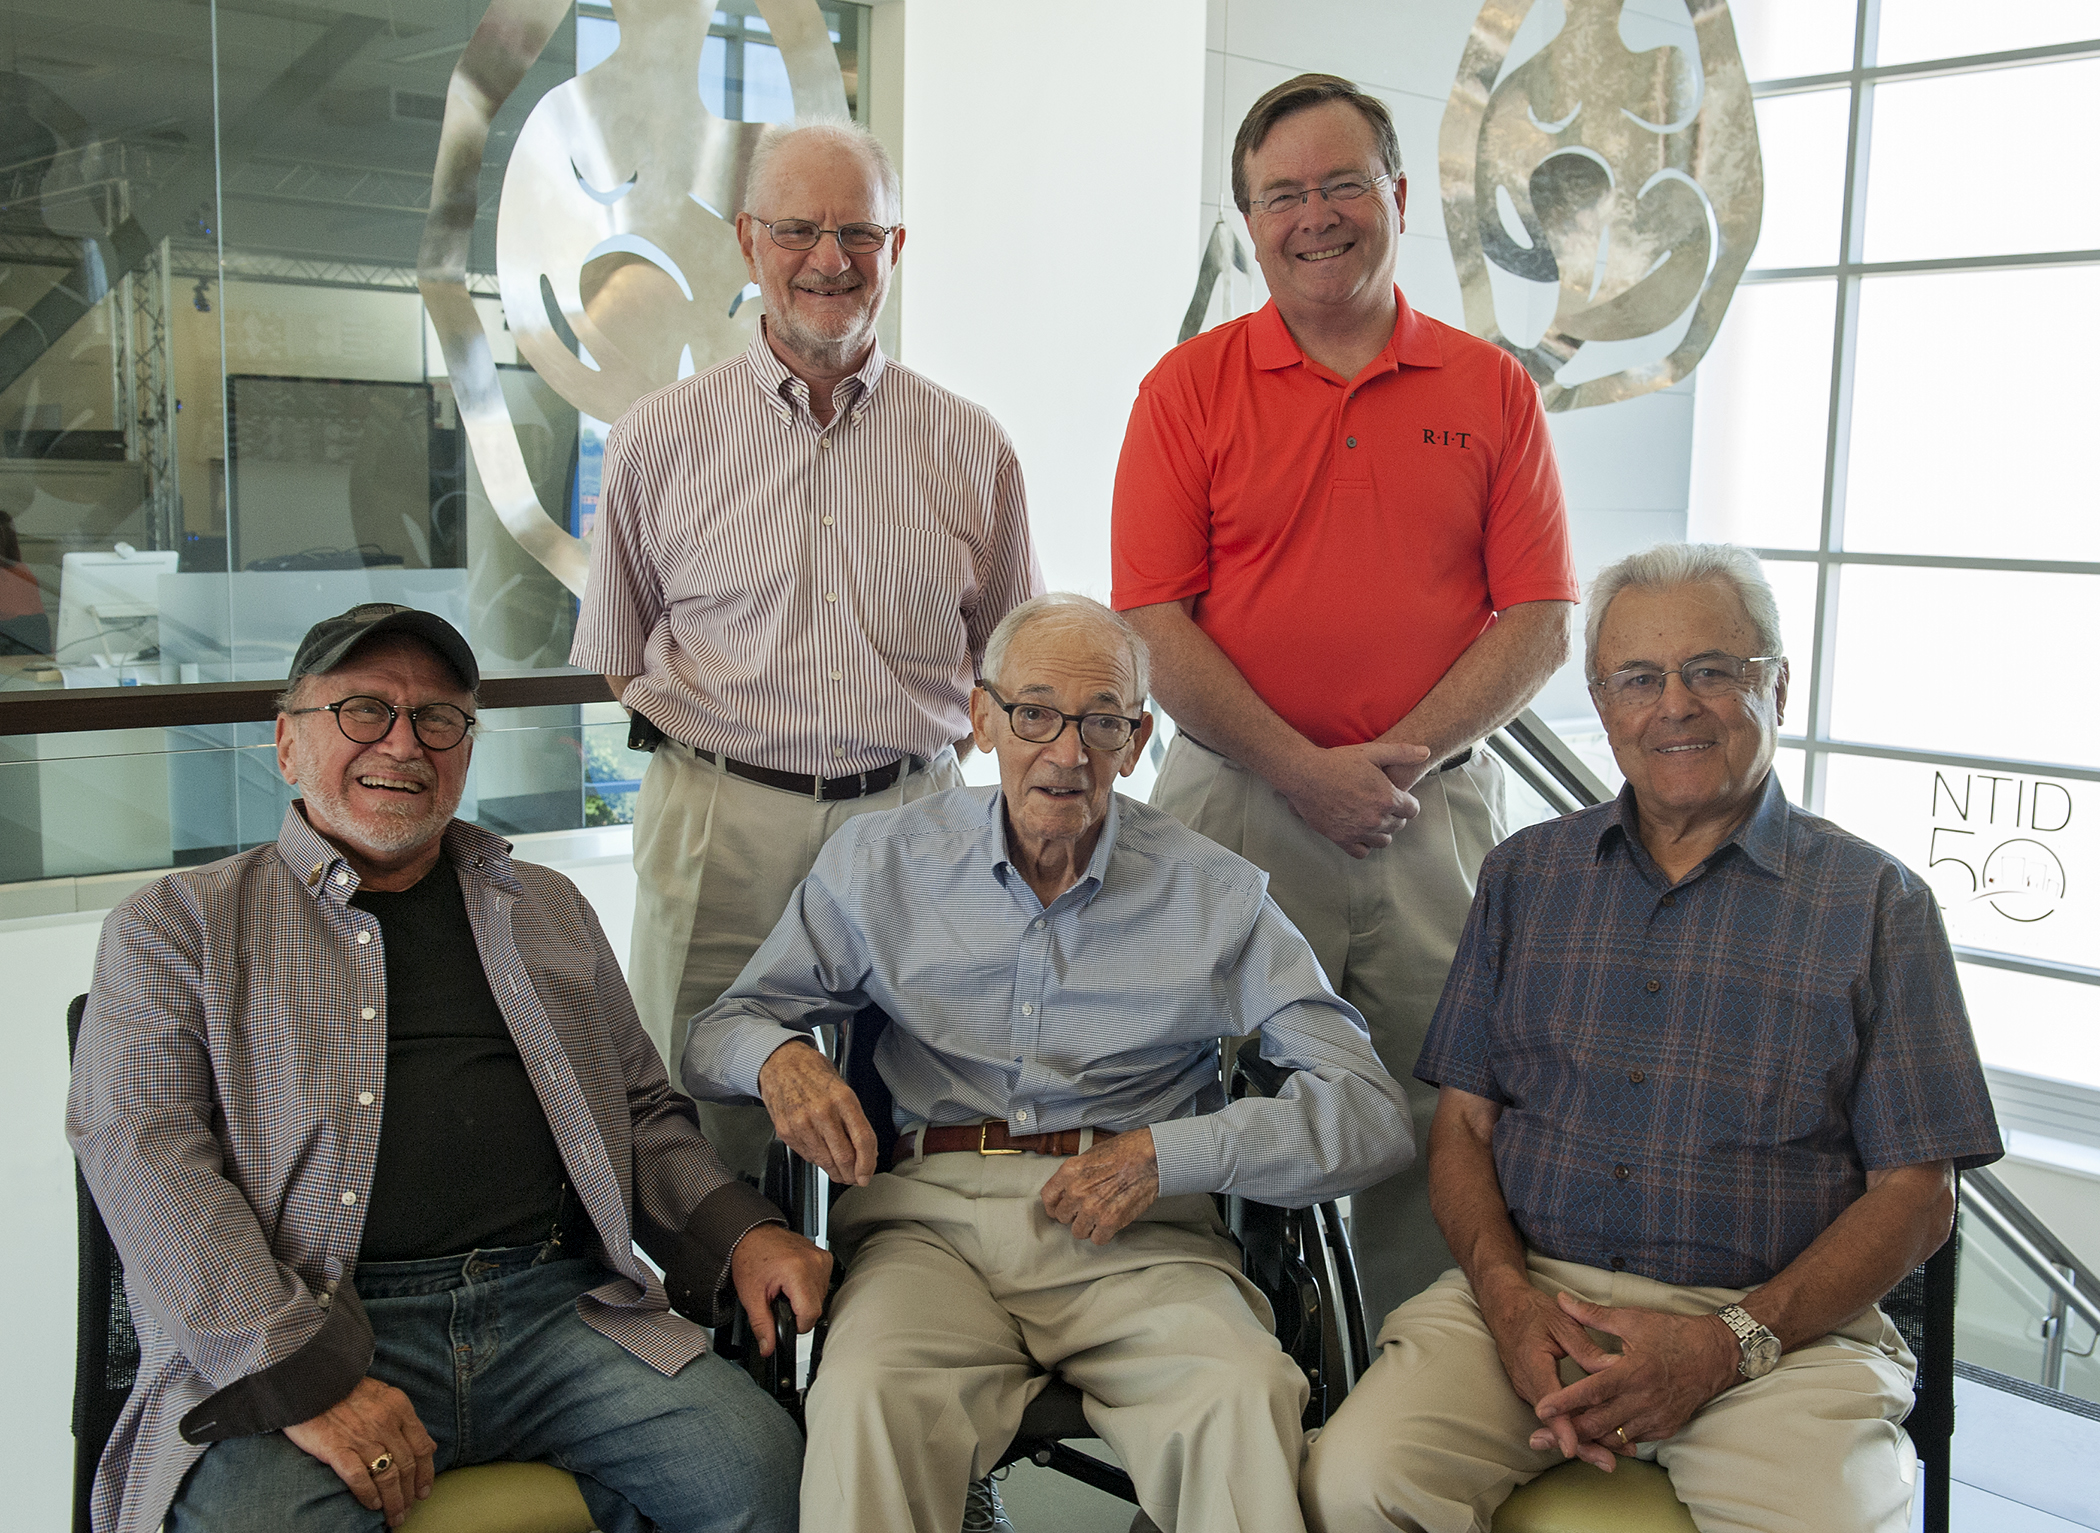 5 NTID presidents pose for a group photo at the NTID 50th Reunion.